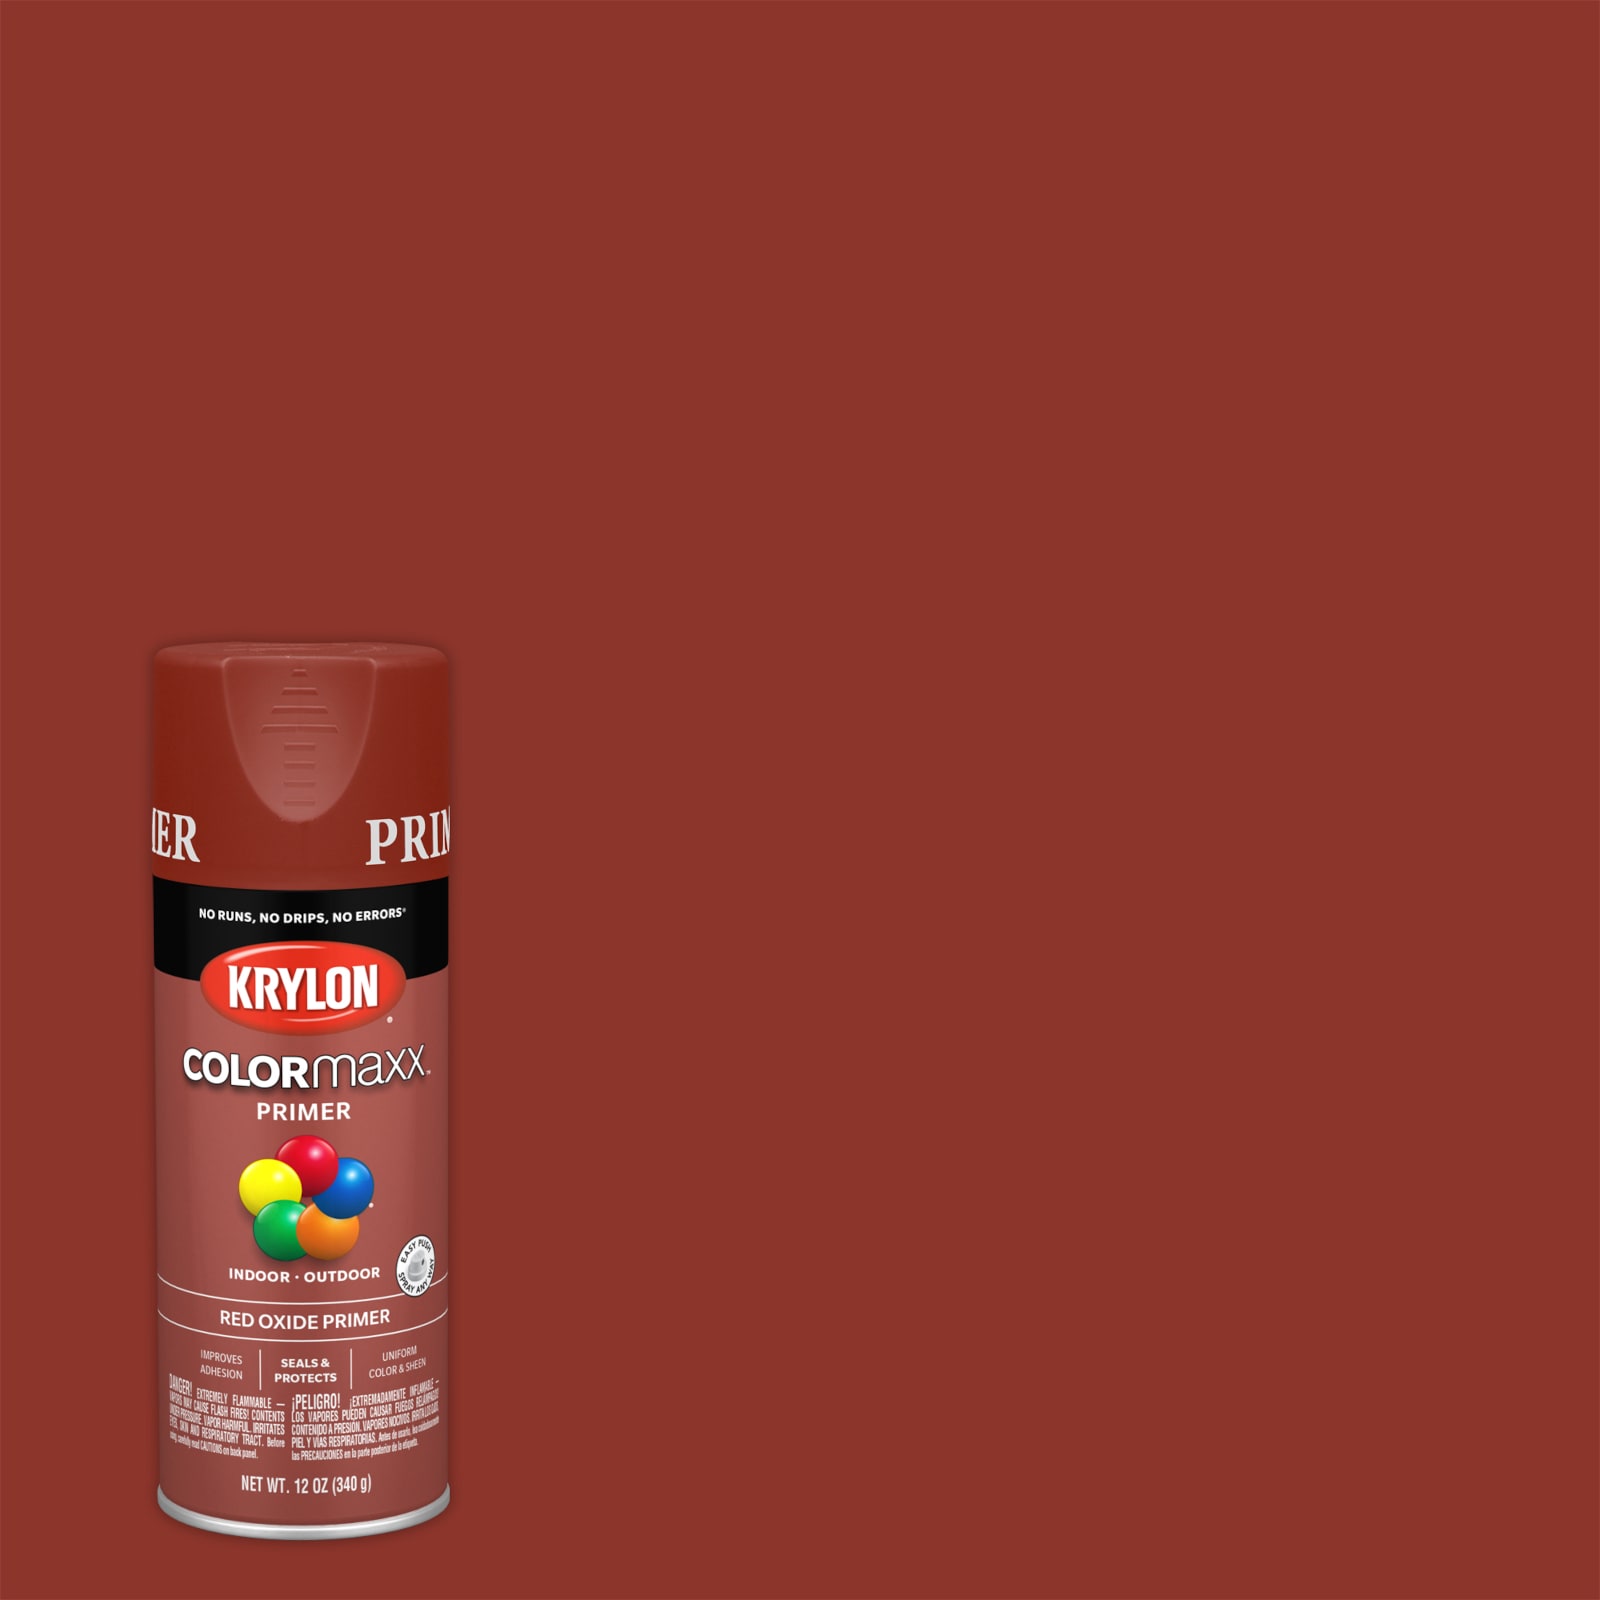 Can You Paint Over Red Oxide Primer? Expert Tips Revealed